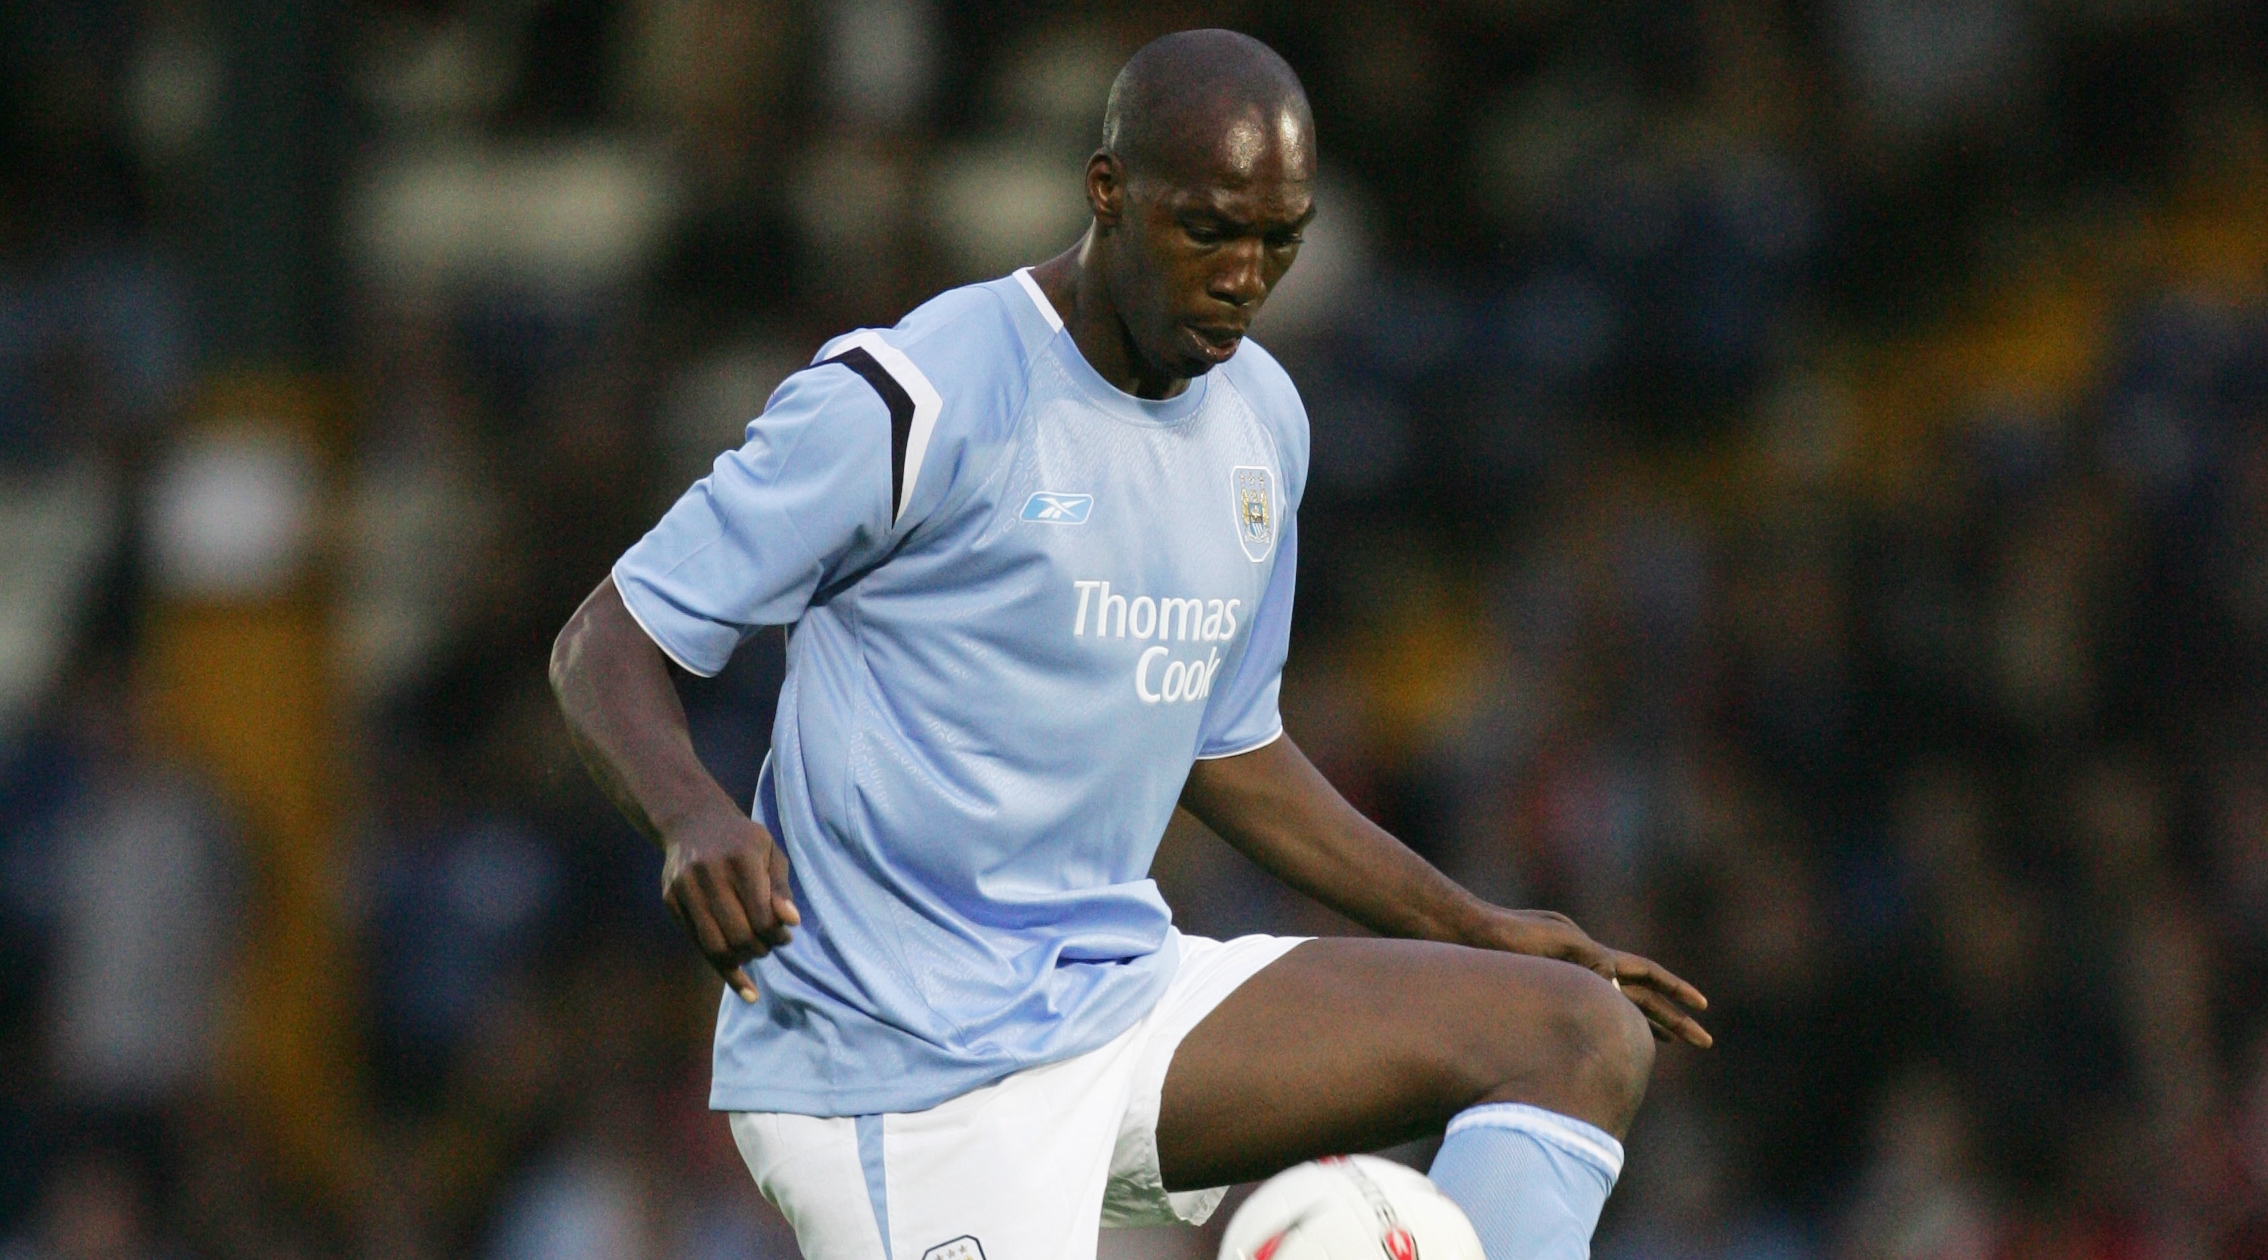 BURY, ENGLAND - JULY 21: Christian Negouai of Manchester City in action during the pre-season friendly match between Bury and Manchester City at Gigg Lane on July 21, 2004 in Bury, England. (Photo by Alex Livesey/Getty Images)